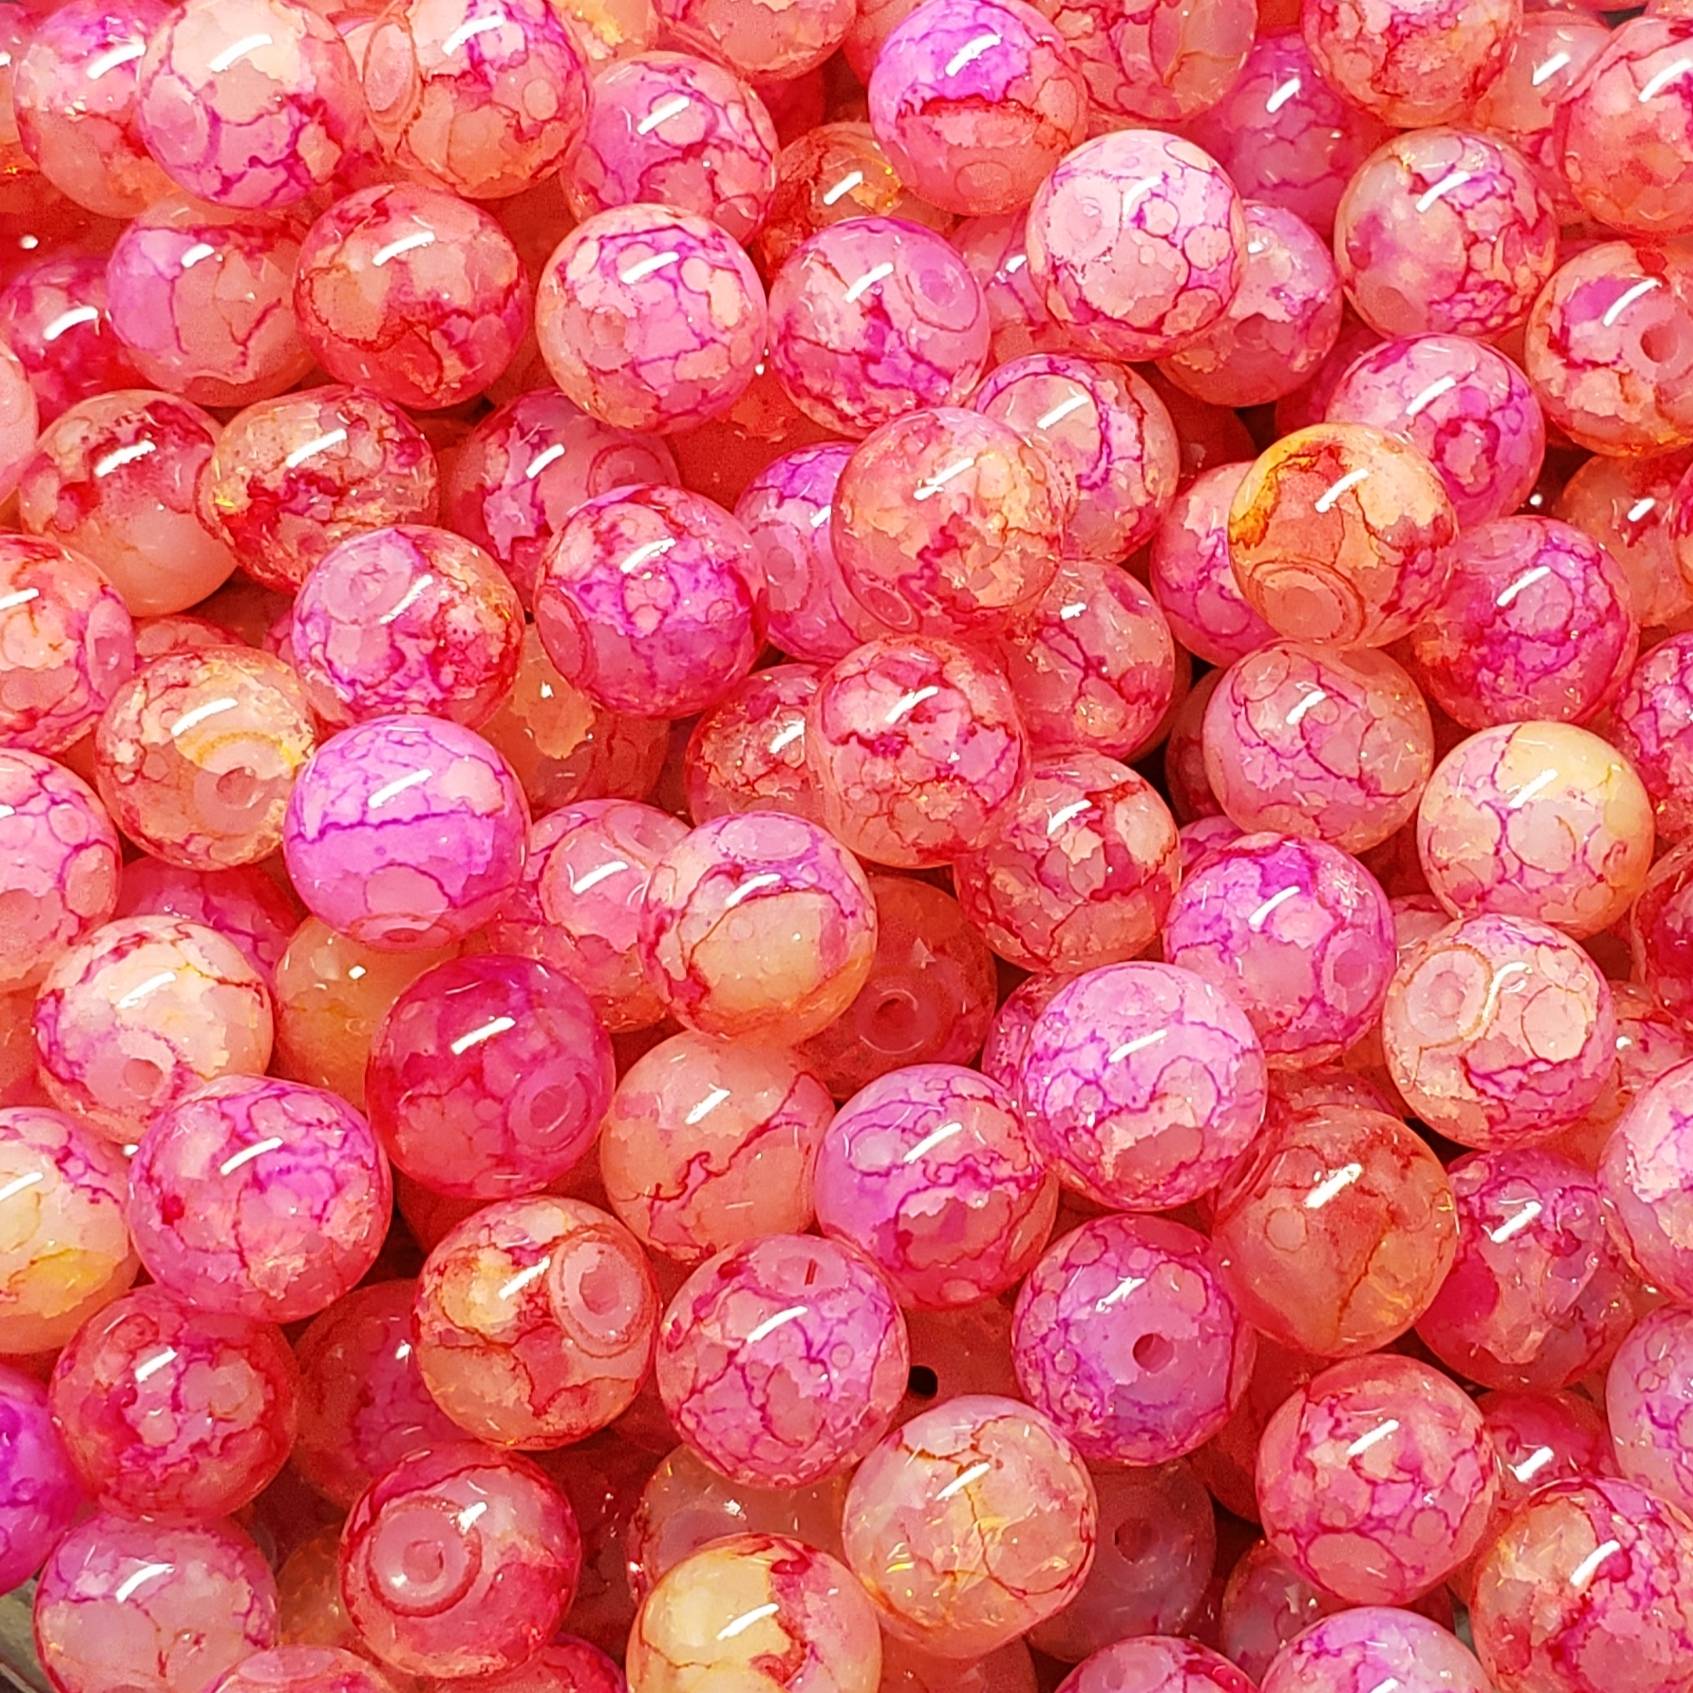 8mm Clear Round Glass Crackle Beads | Hackberry Creek